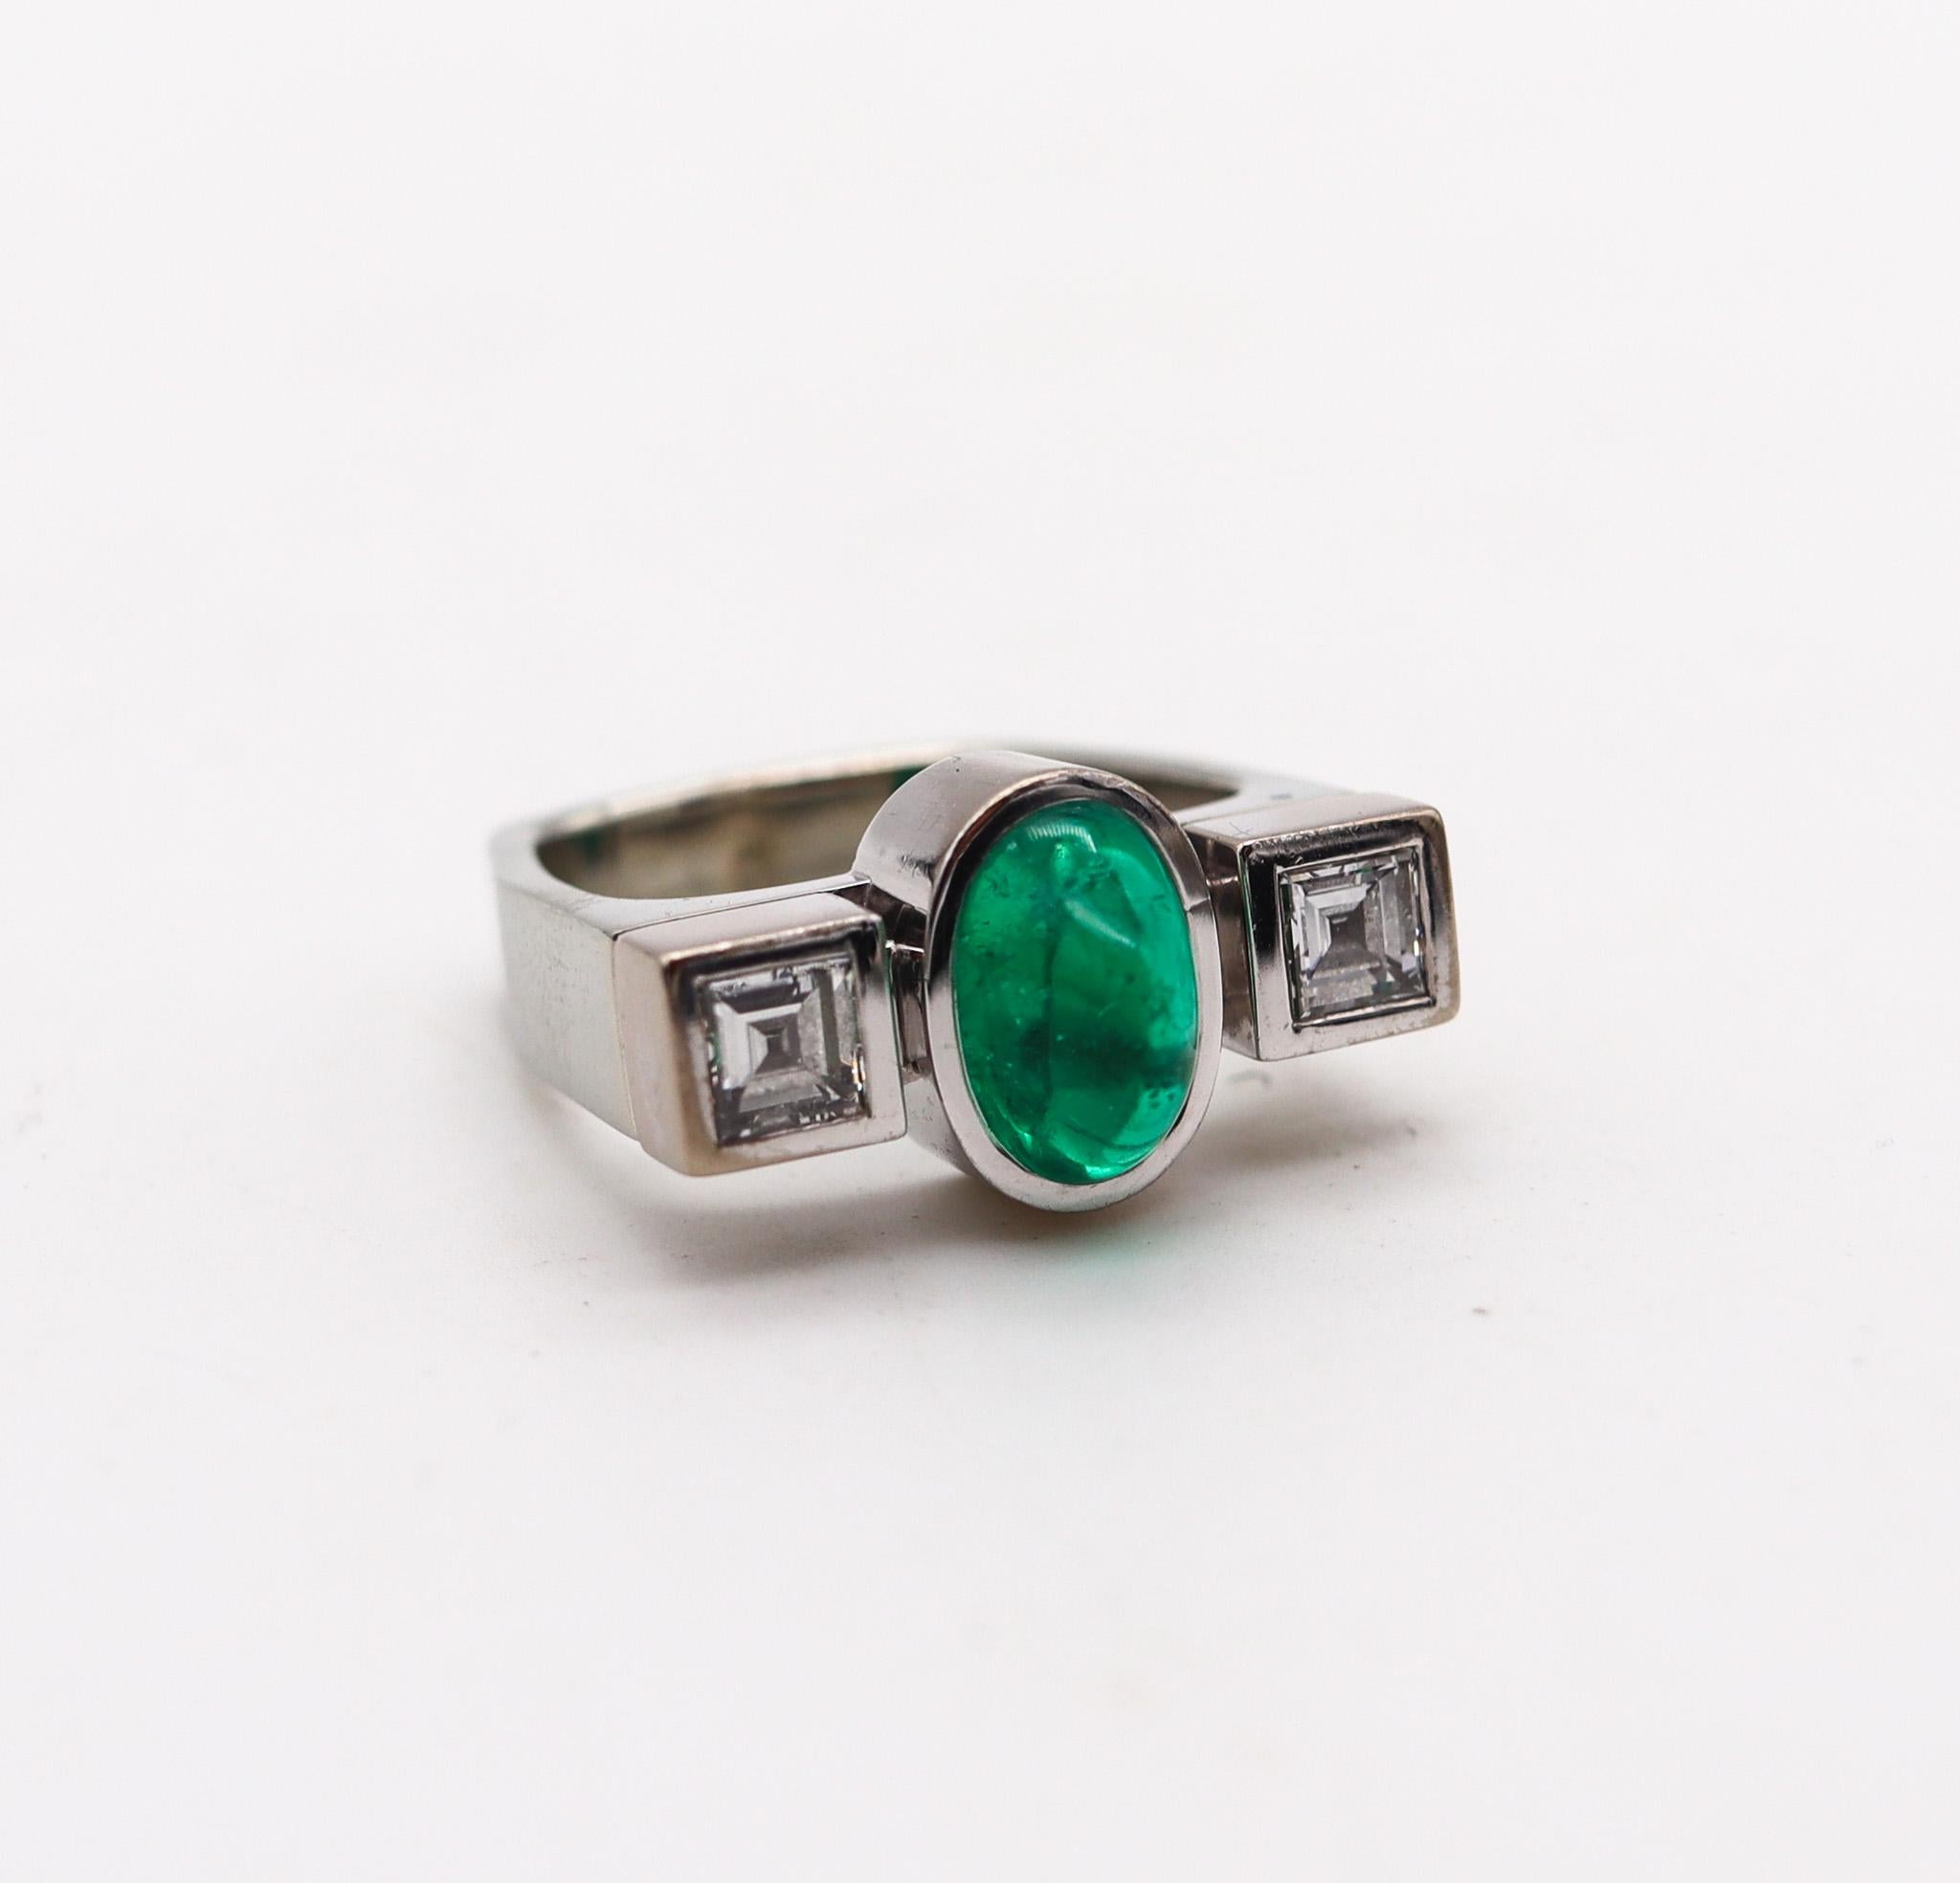 Modernist Trudel By Kurt Aepli Geometric Ring 18Kt Gold With 3.02 Ctw Emerald And Diamonds For Sale